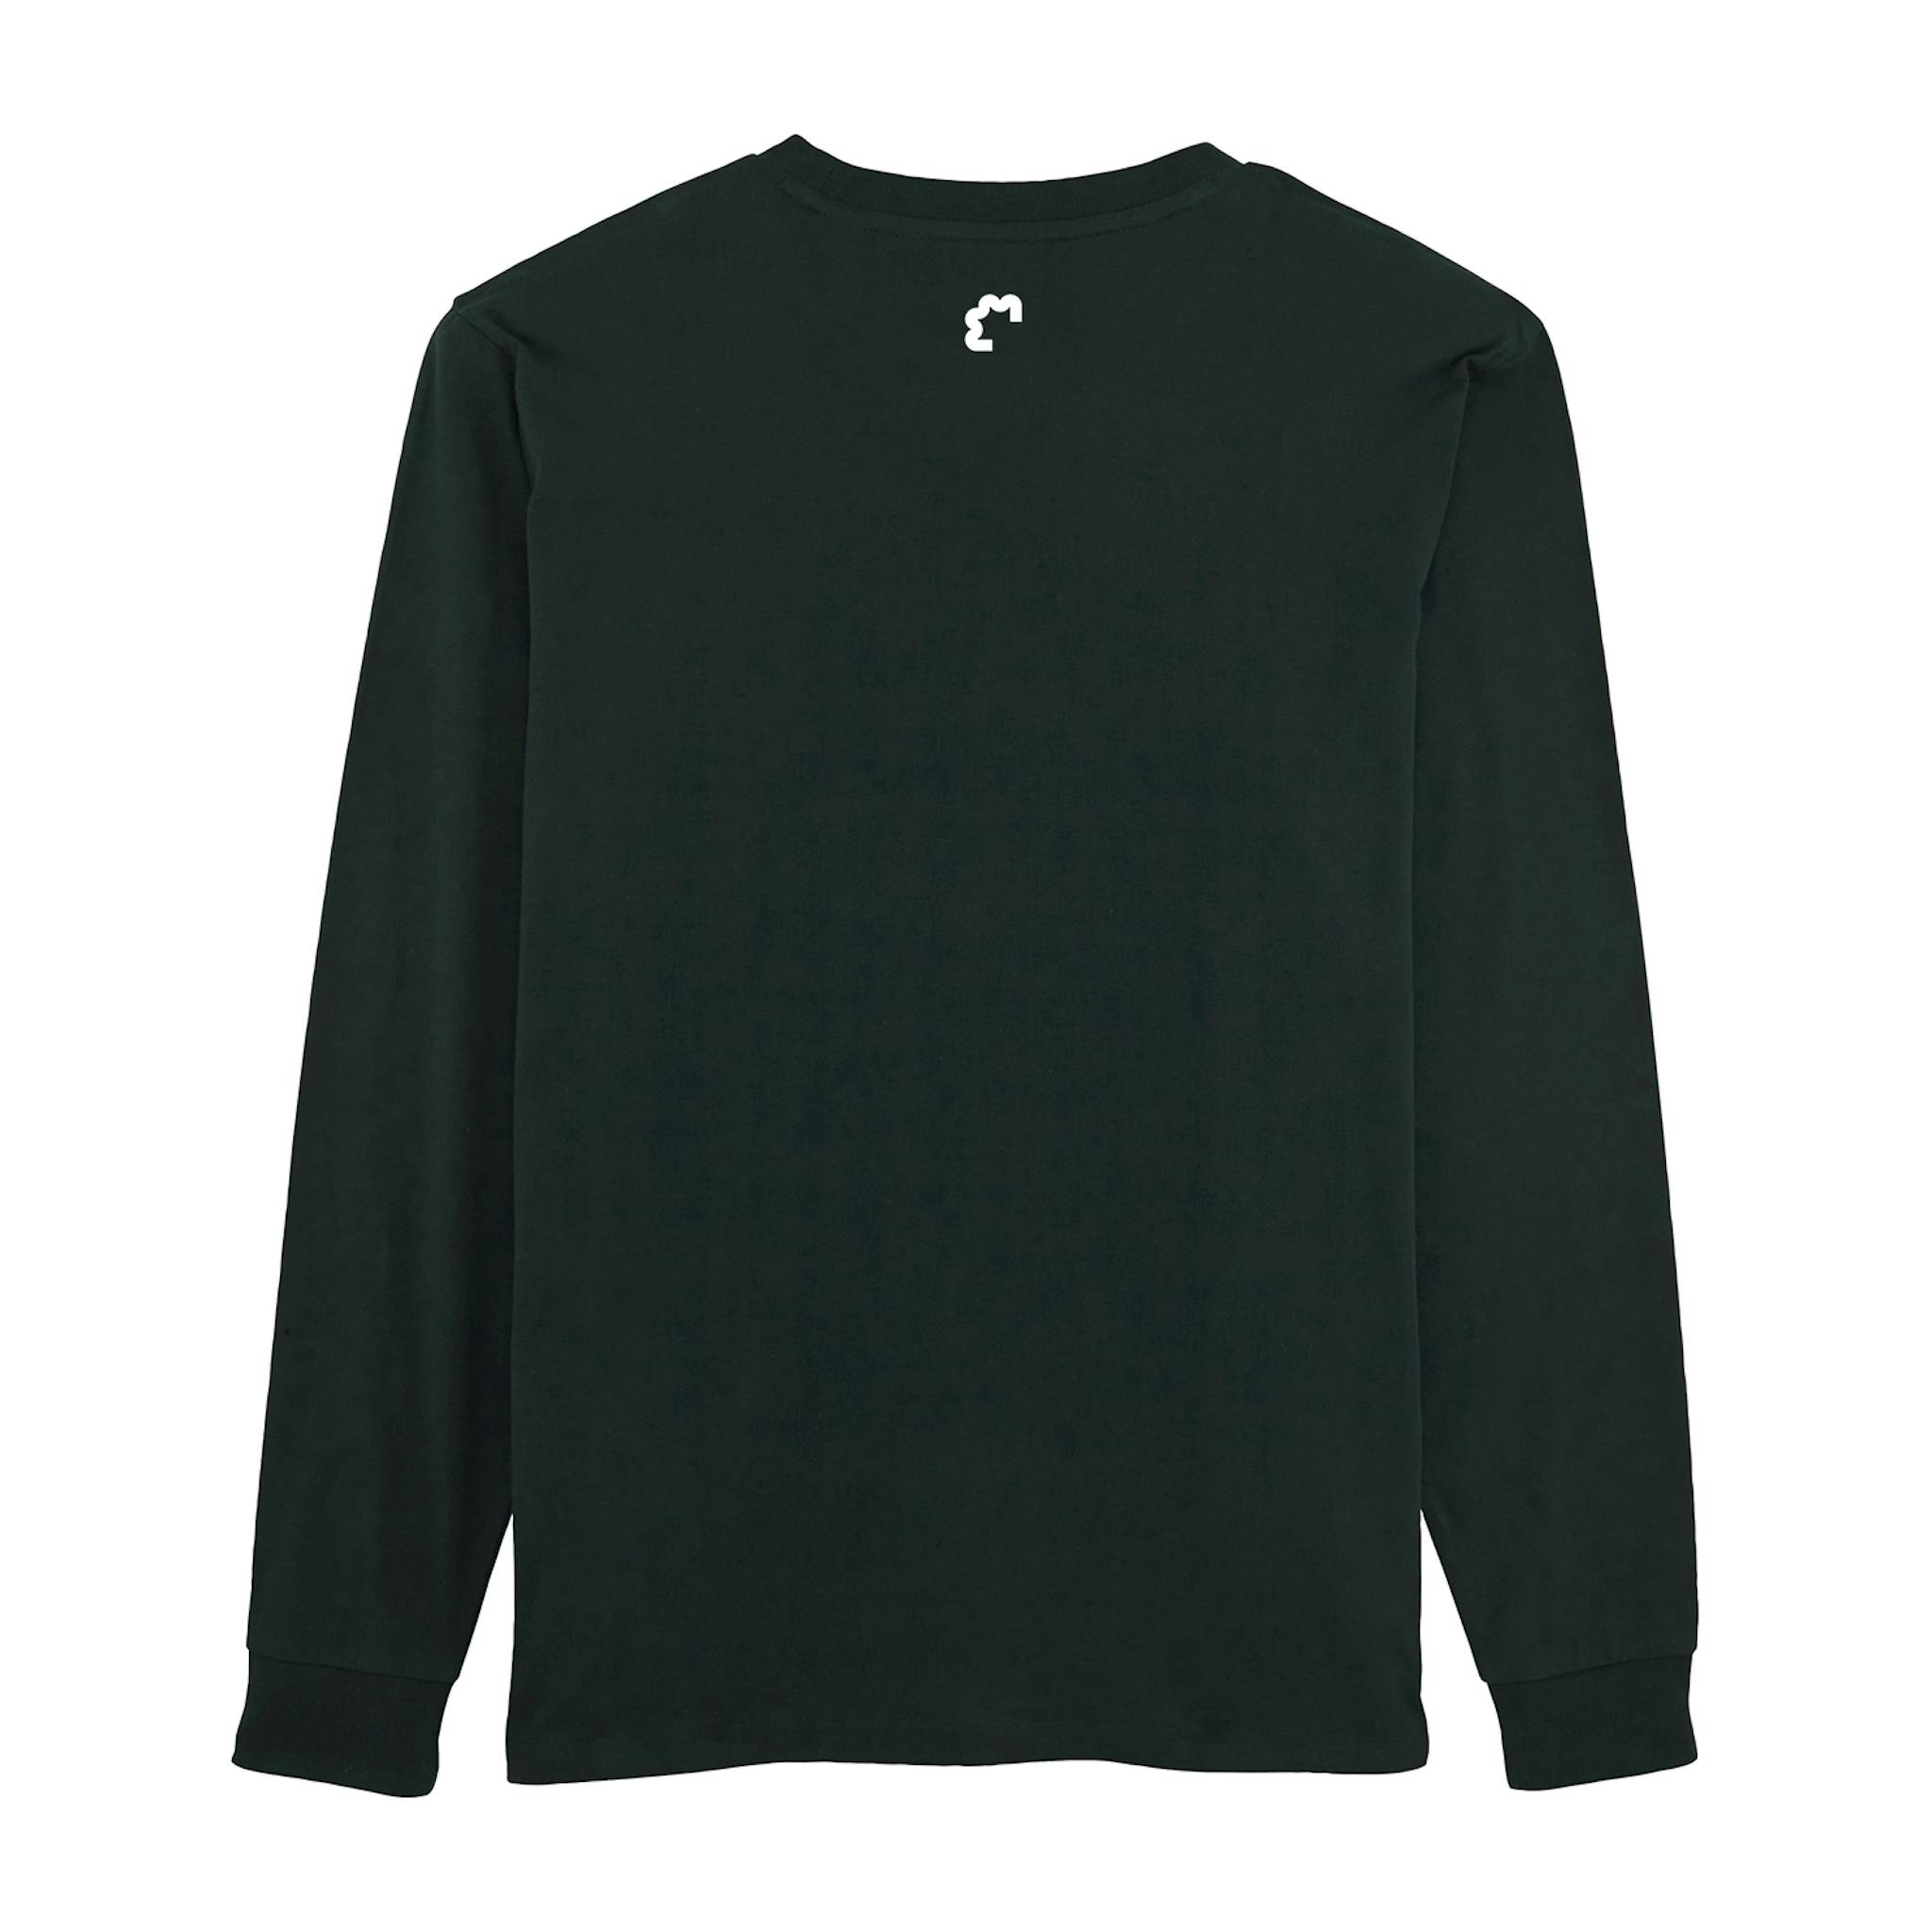 A long sleeve black shirt with a small white logo on the upper back. 